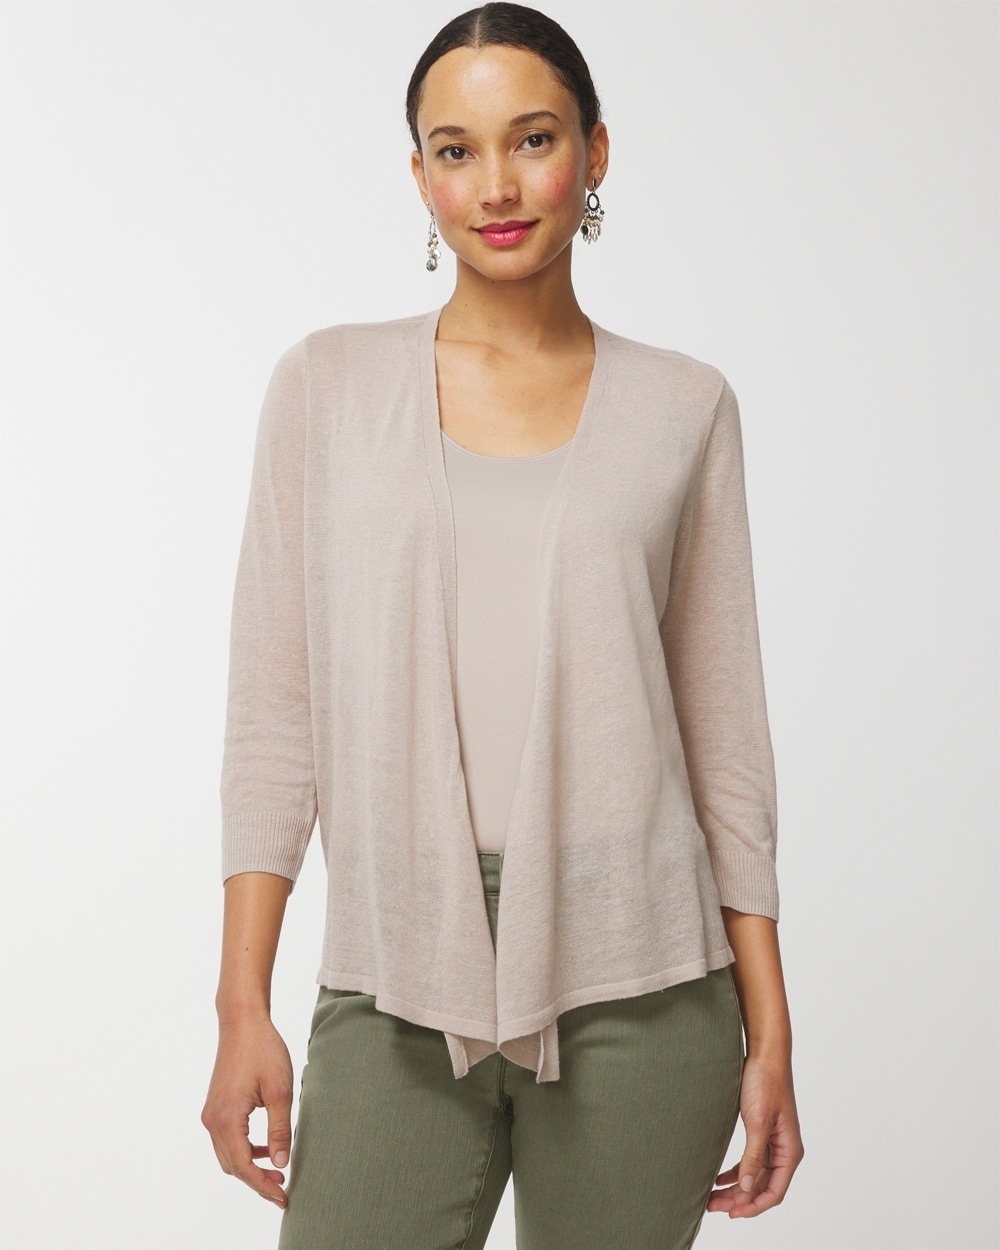 Convertible Cardigan - Chico's Off The Rack - Chico's Outlet